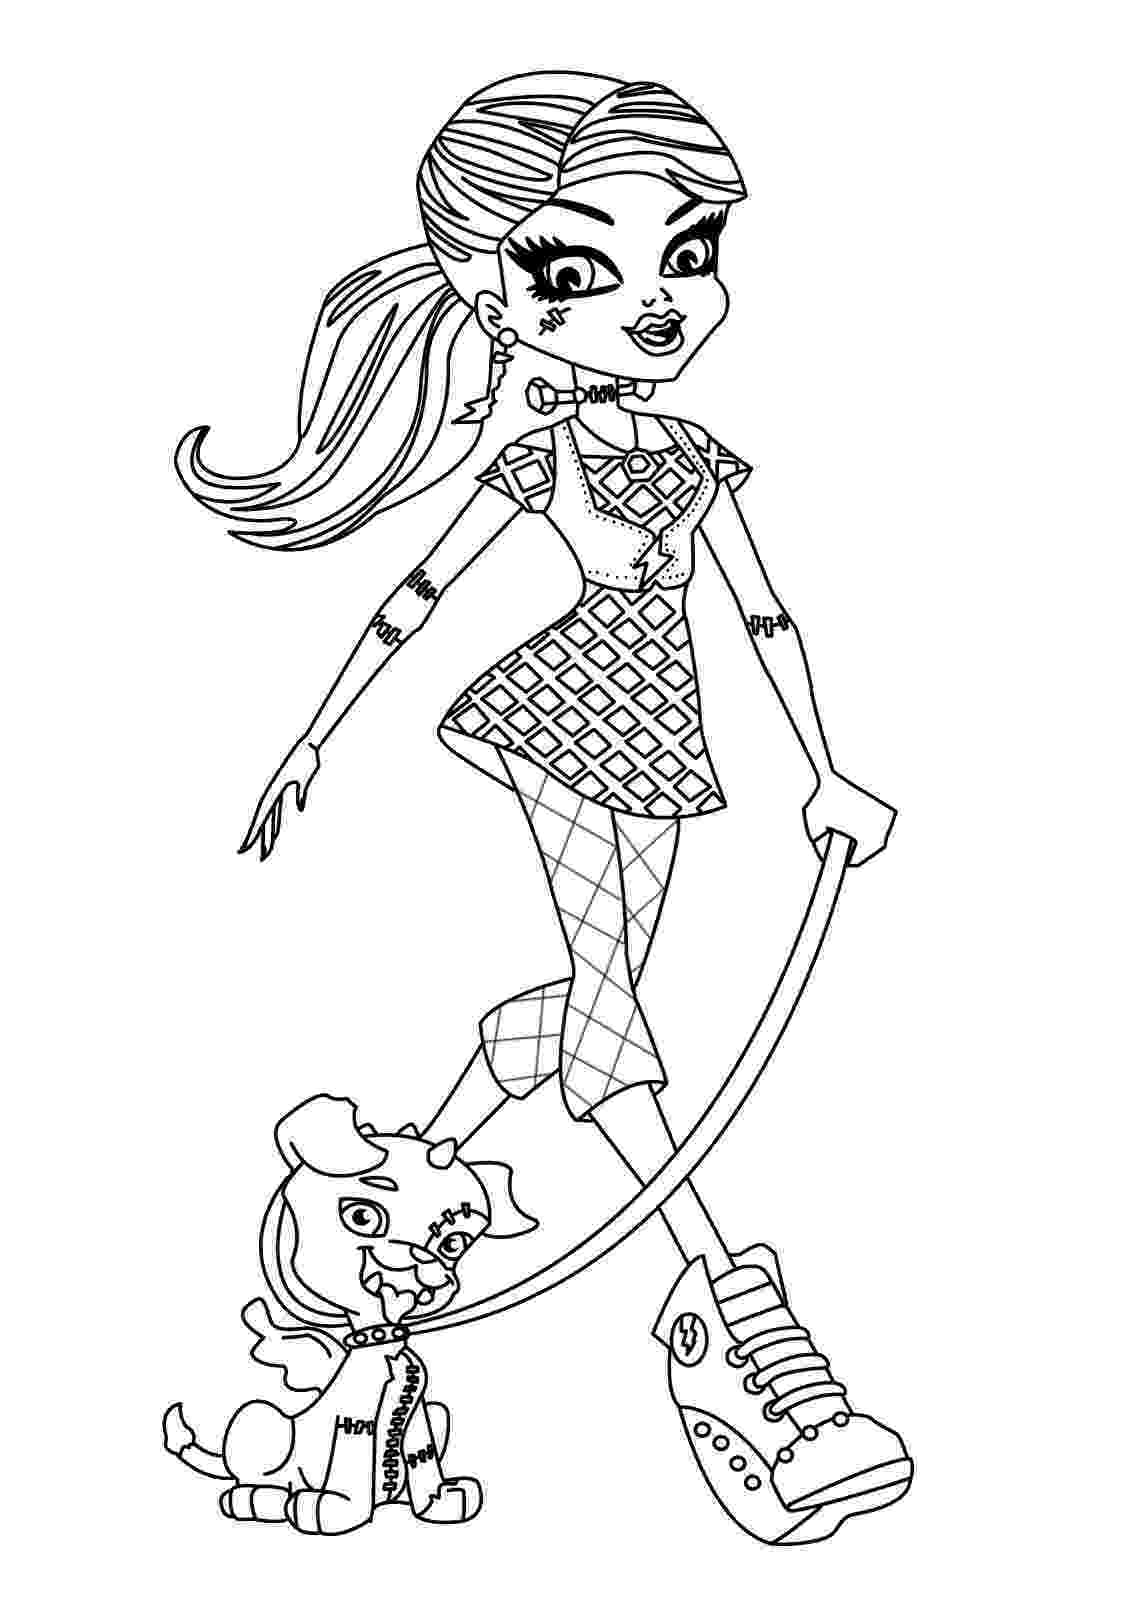 monster high colouring coloring pages monster high coloring pages free and printable colouring monster high 1 1